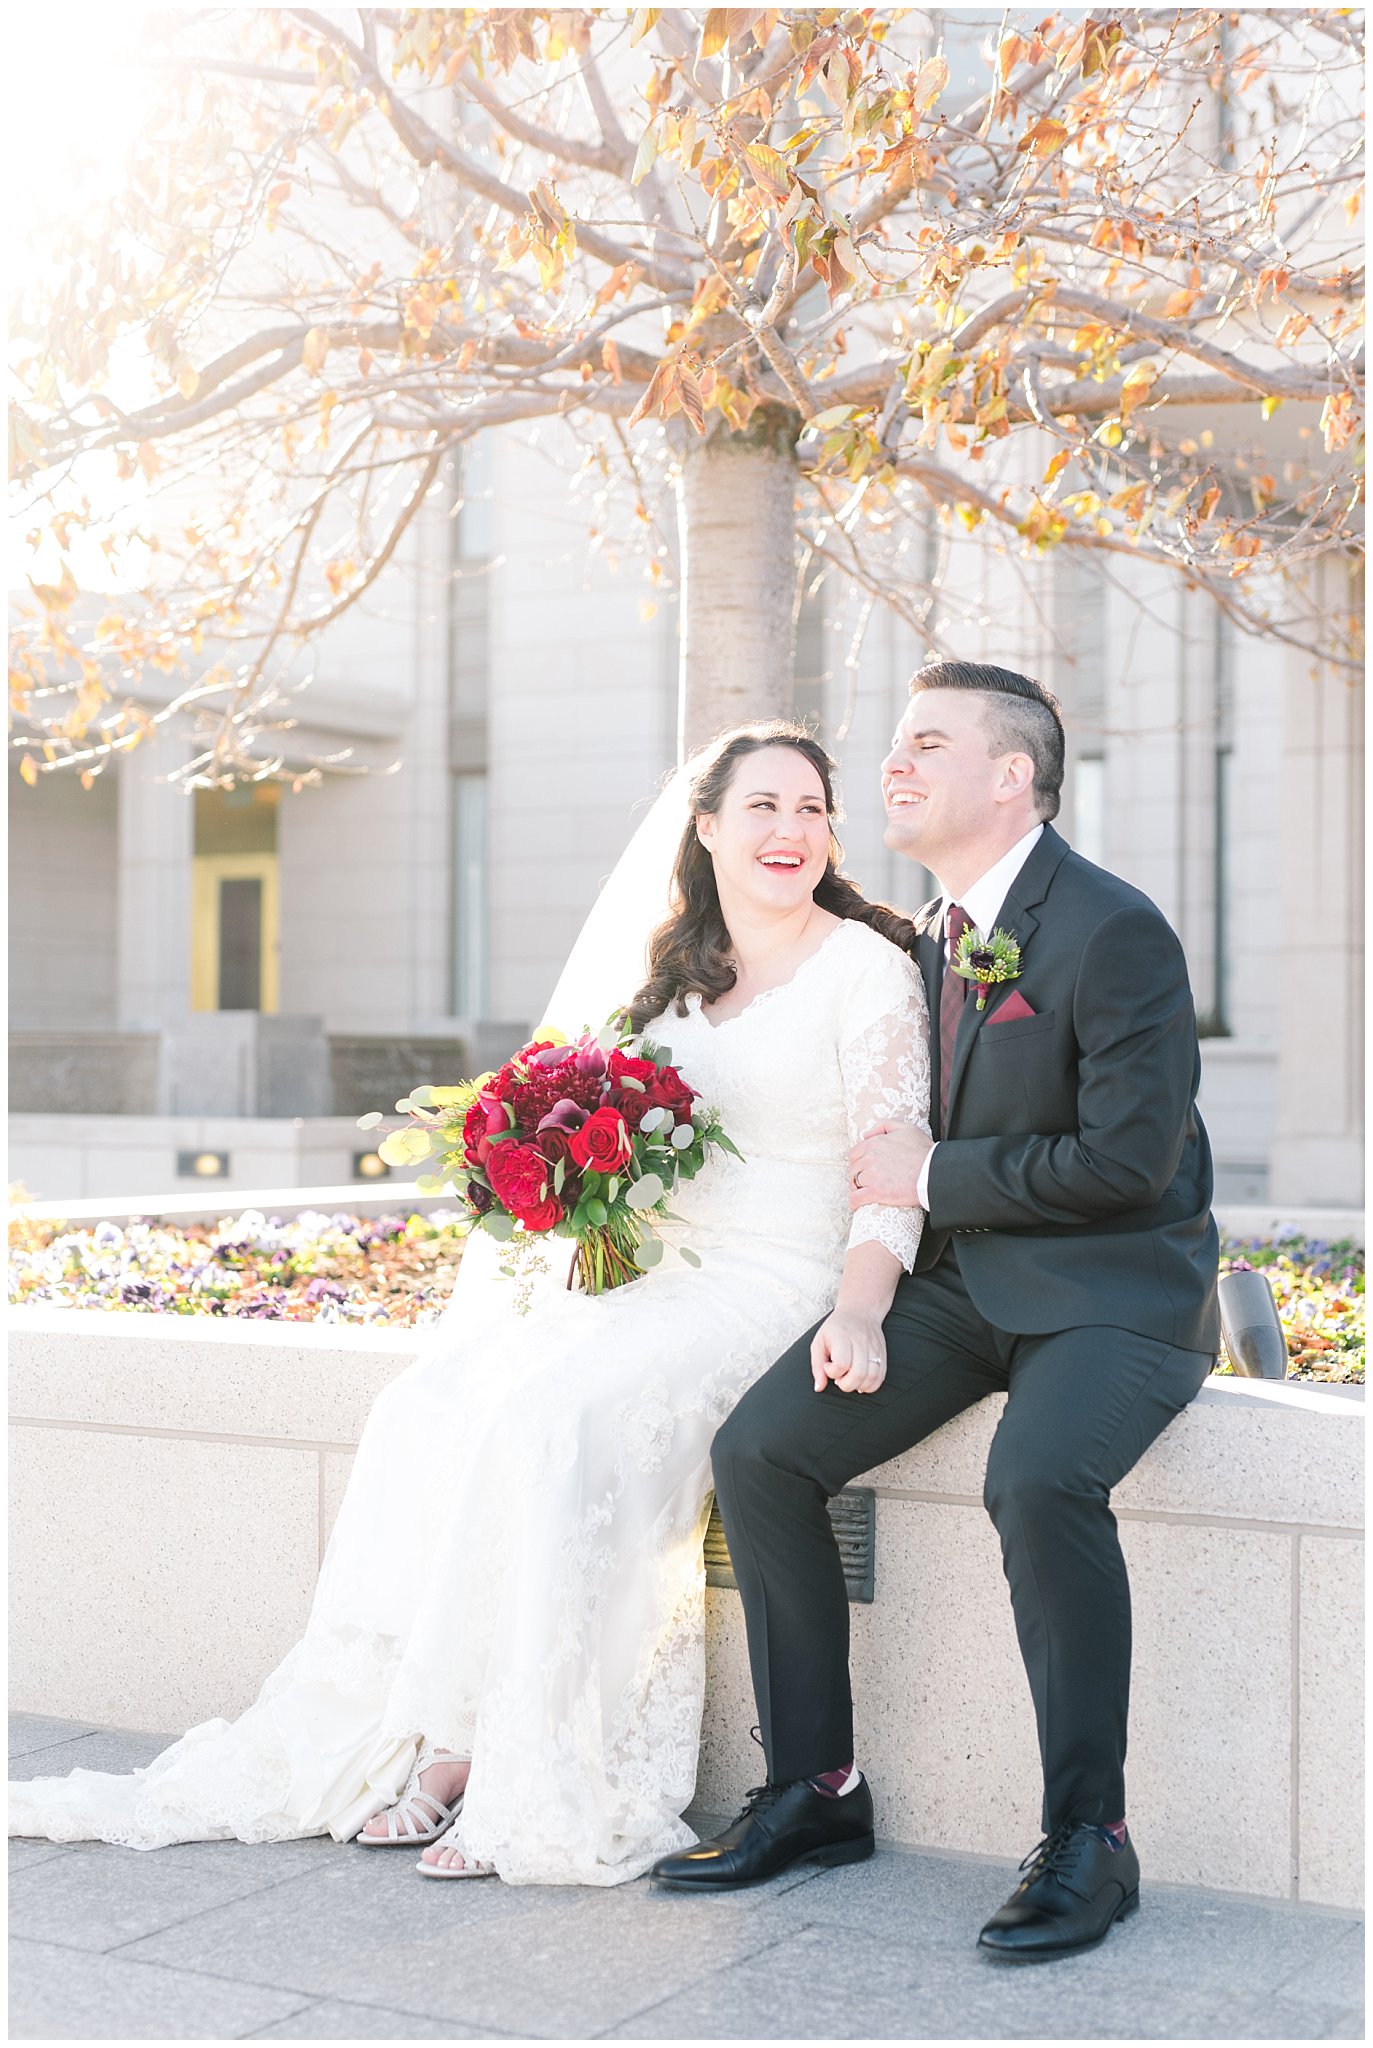 Bride and groom portraits with a veil, flowy lace dress and black suit with red and white bouquet at the Oquirrh Mountain Temple | Oquirrh Mountain Temple and Gardner Village Wedding | The Gathering Place | Jessie and Dallin Photography